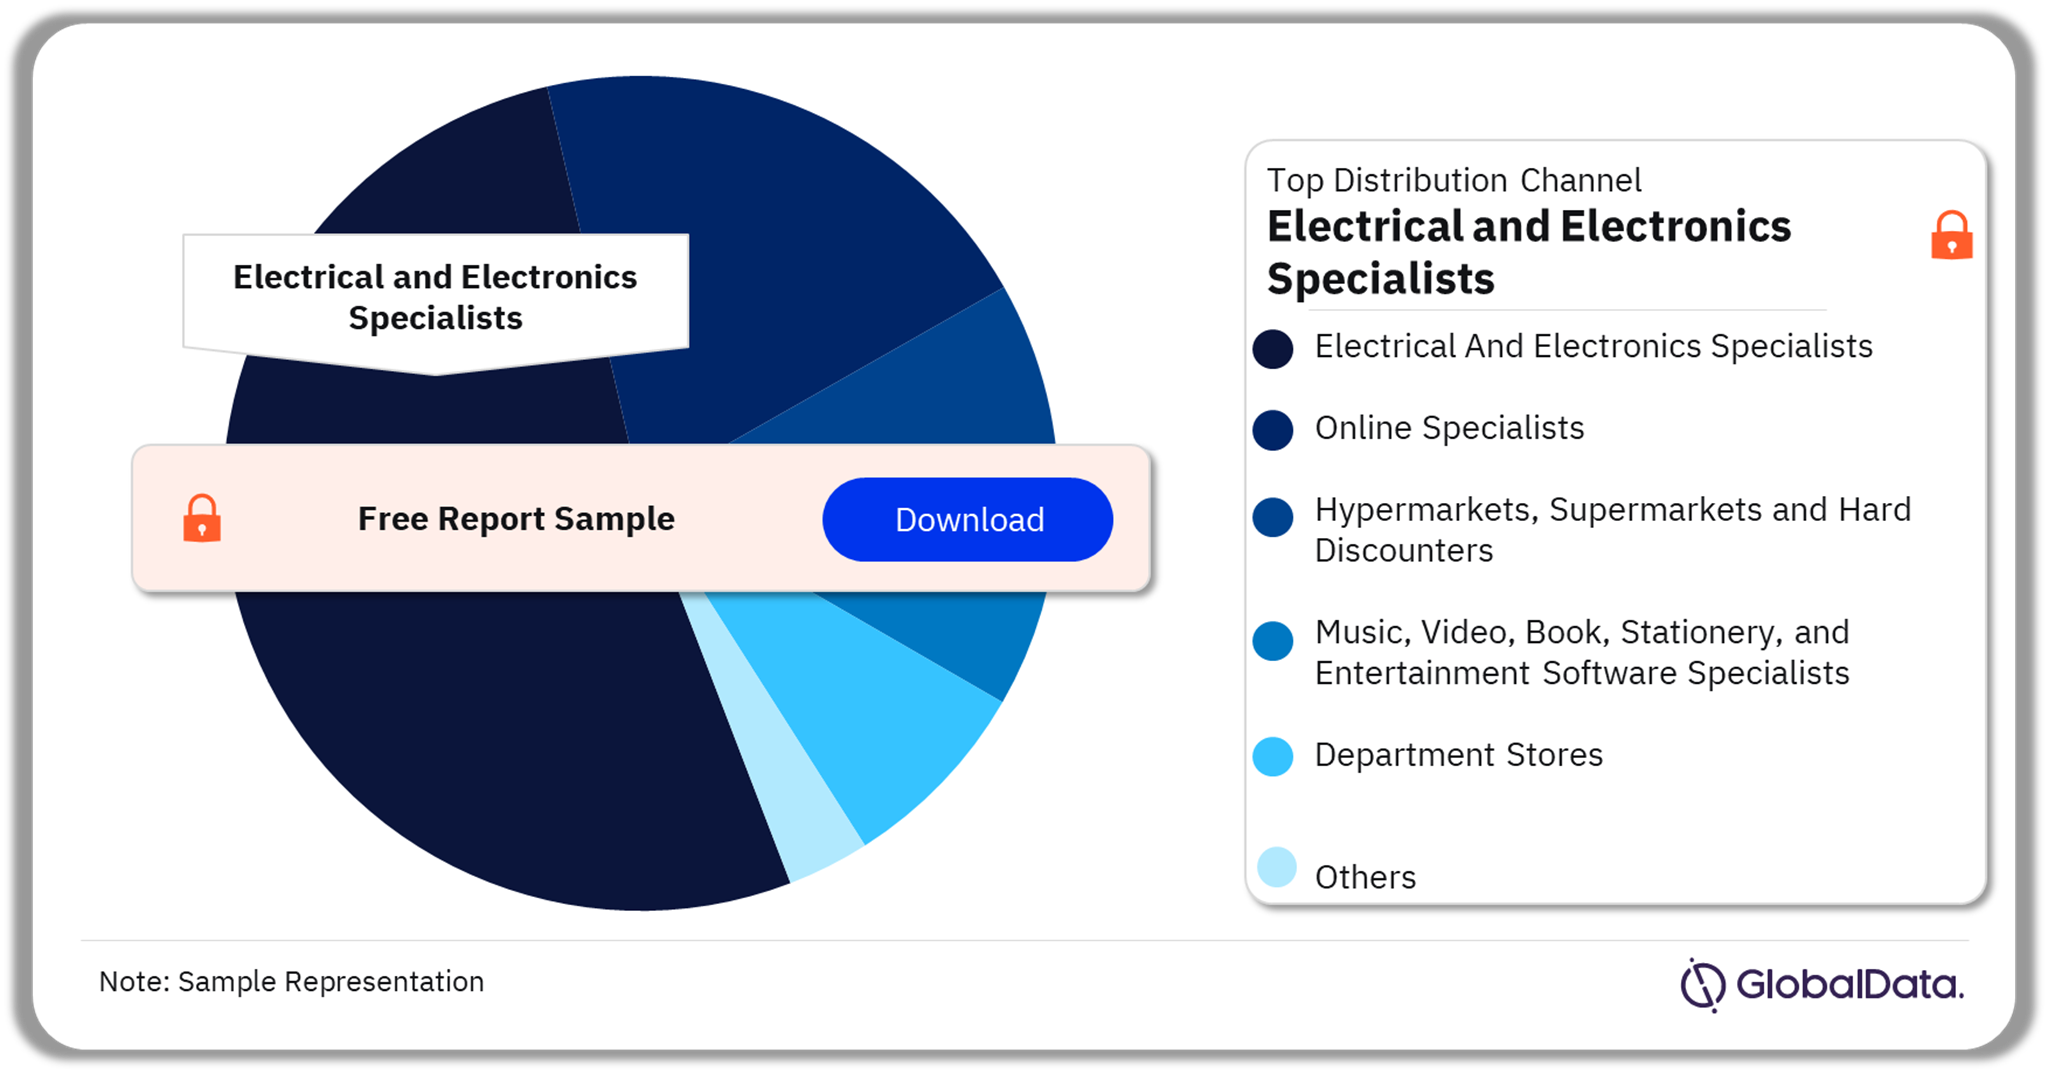 MEA Electricals Retailing Market Analysis by Channels, 2022 (%)